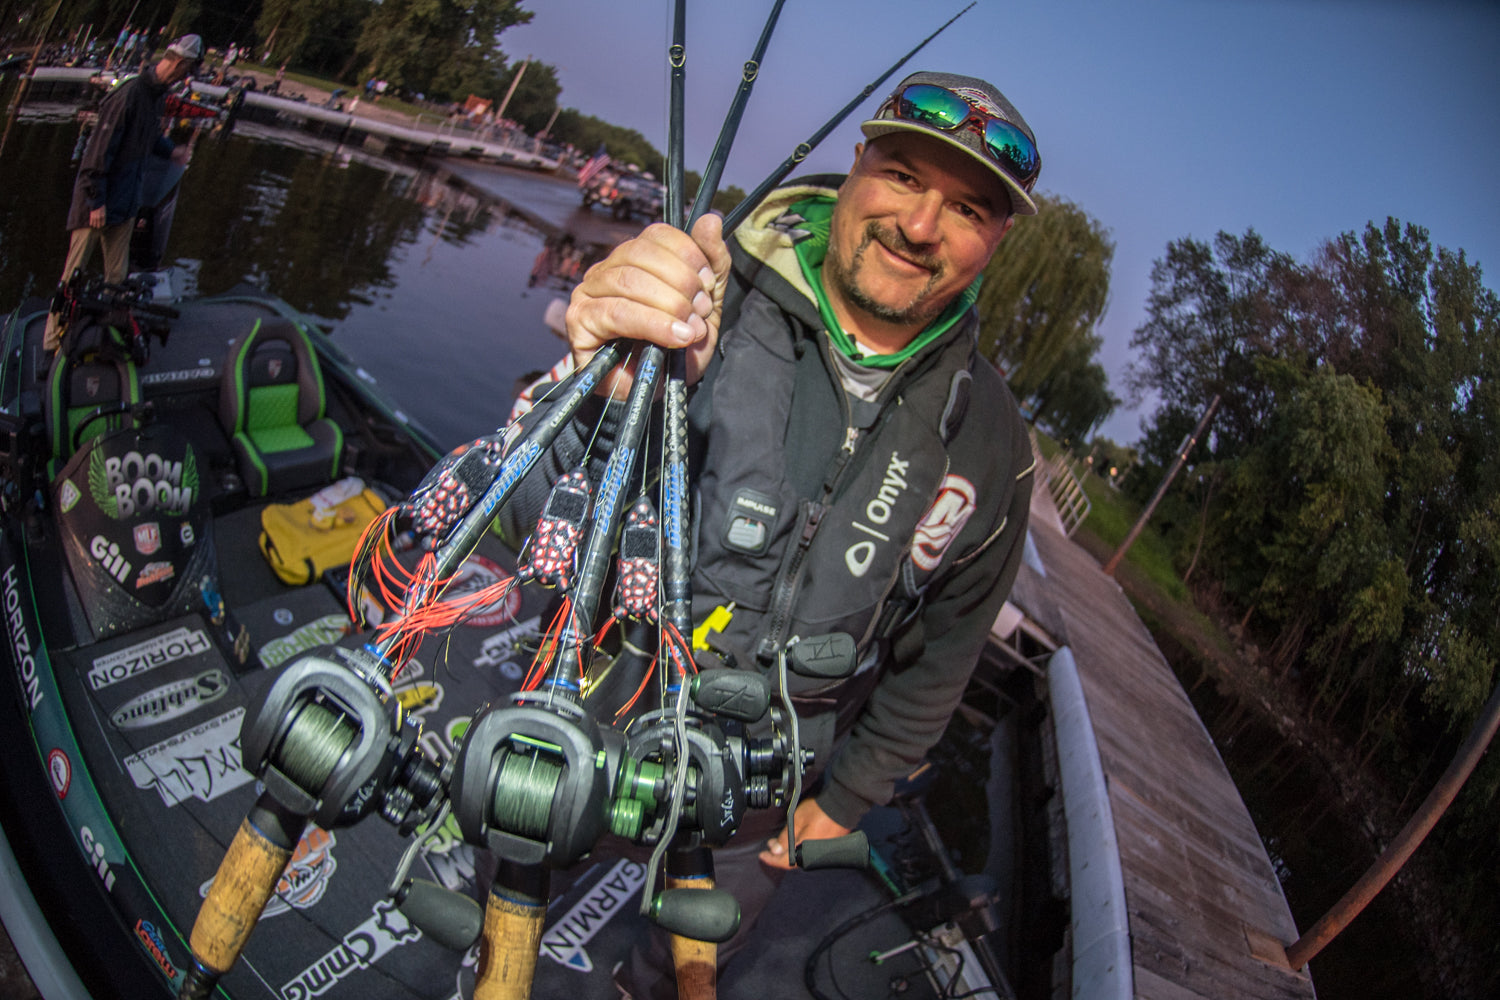 Q&A with MLF Pro Fred Roumbanis